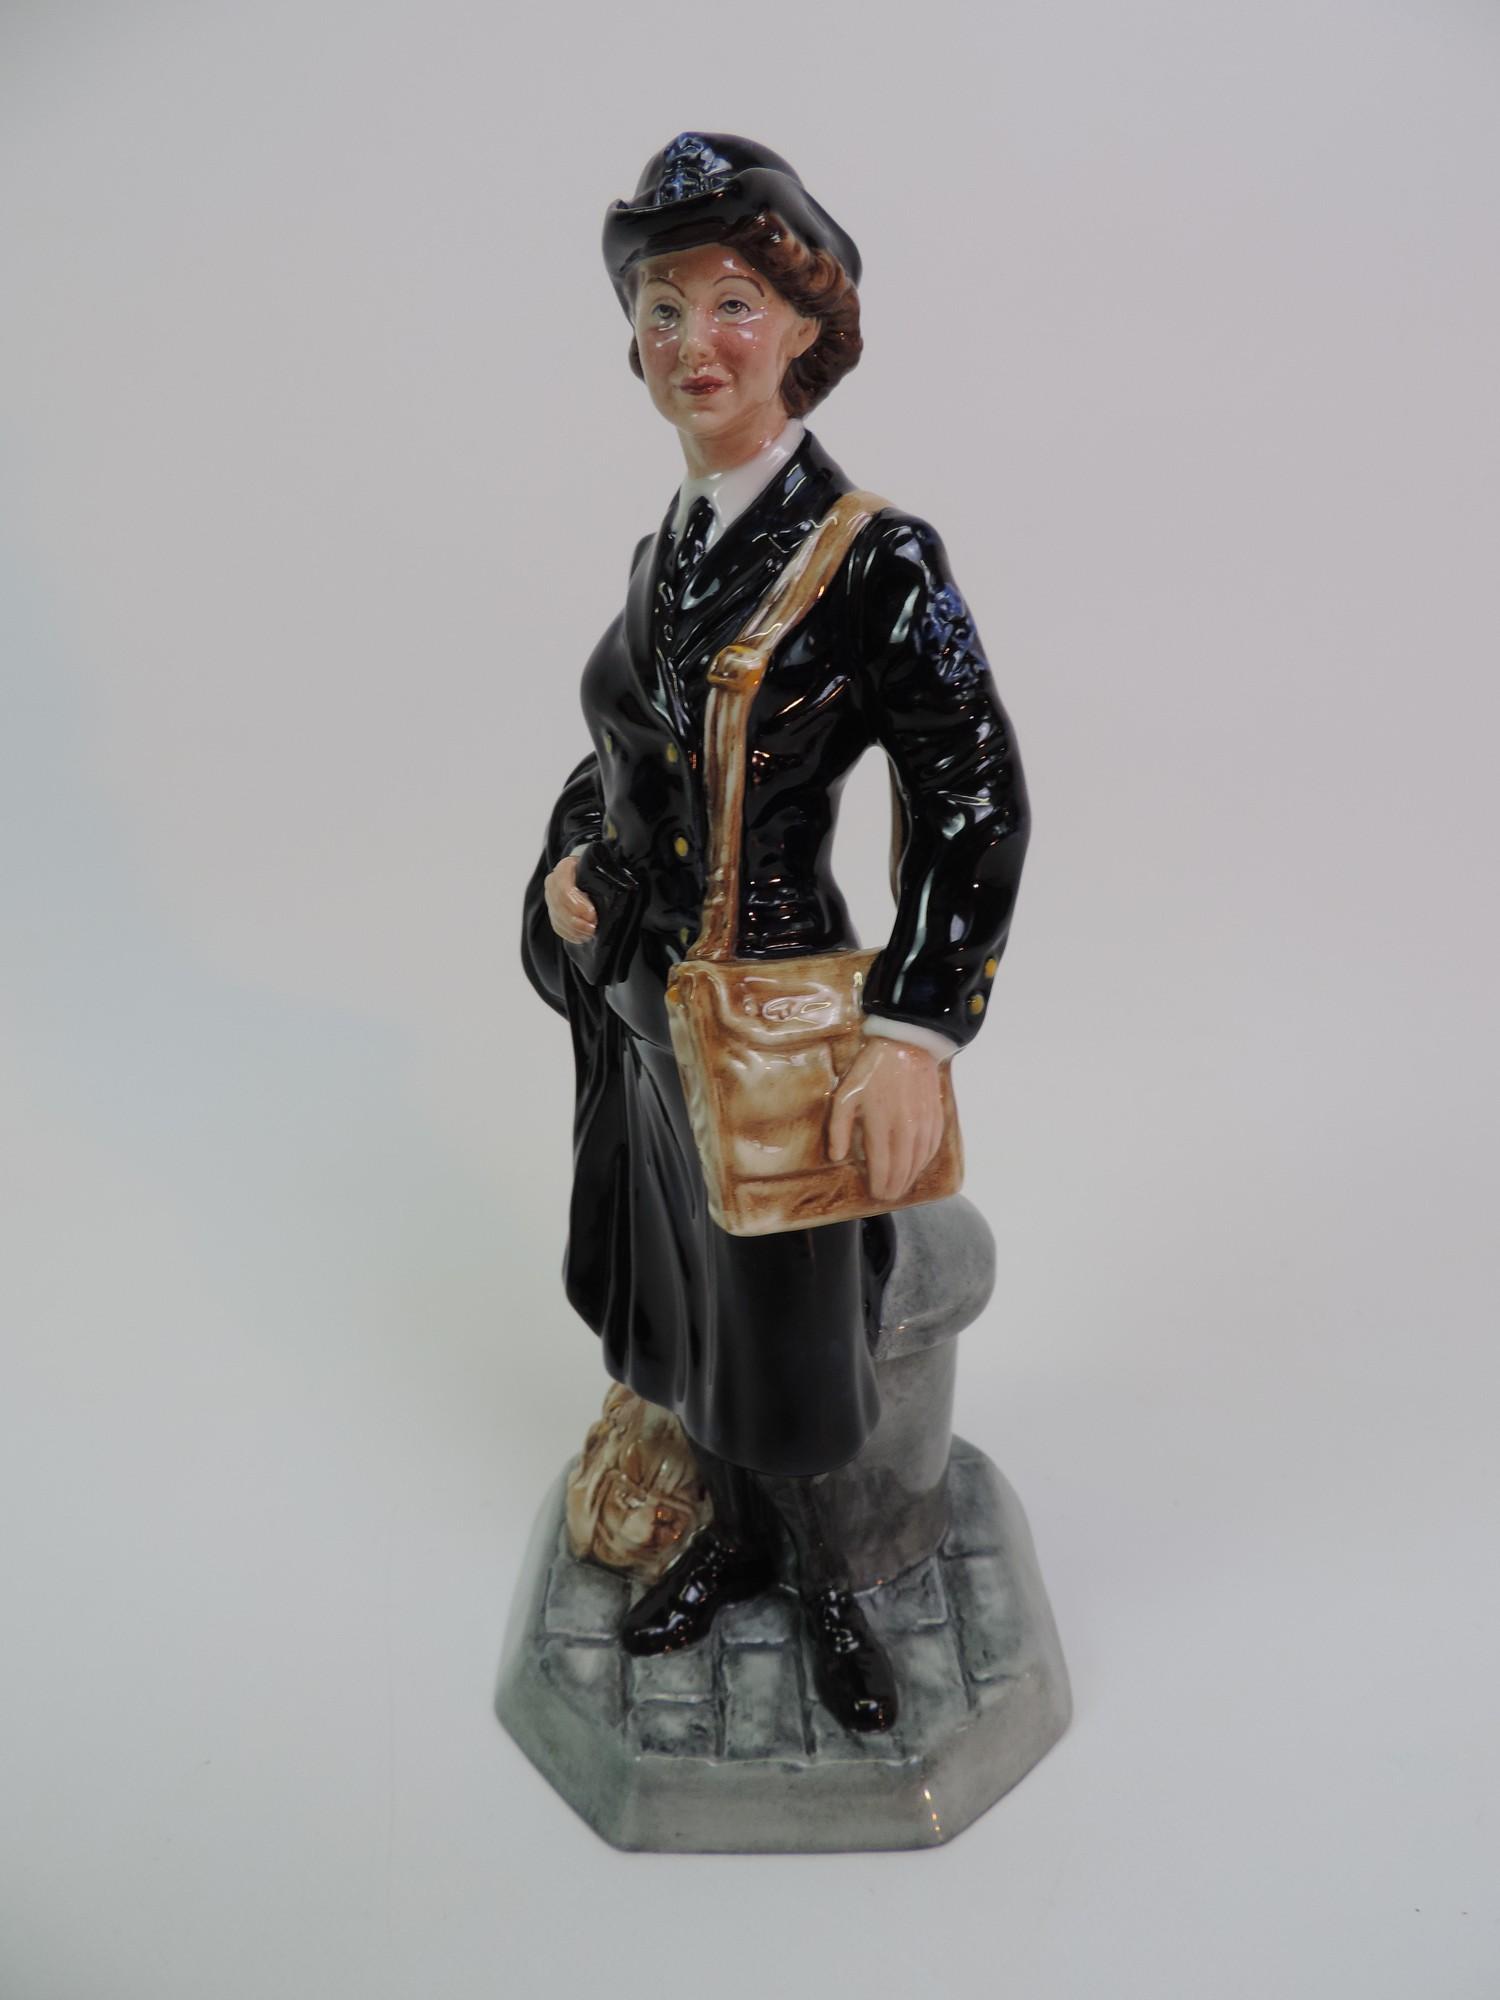 Royal Doulton Classics Woman's Royal Naval Service Figurine - No 447 - With Box - Image 3 of 4